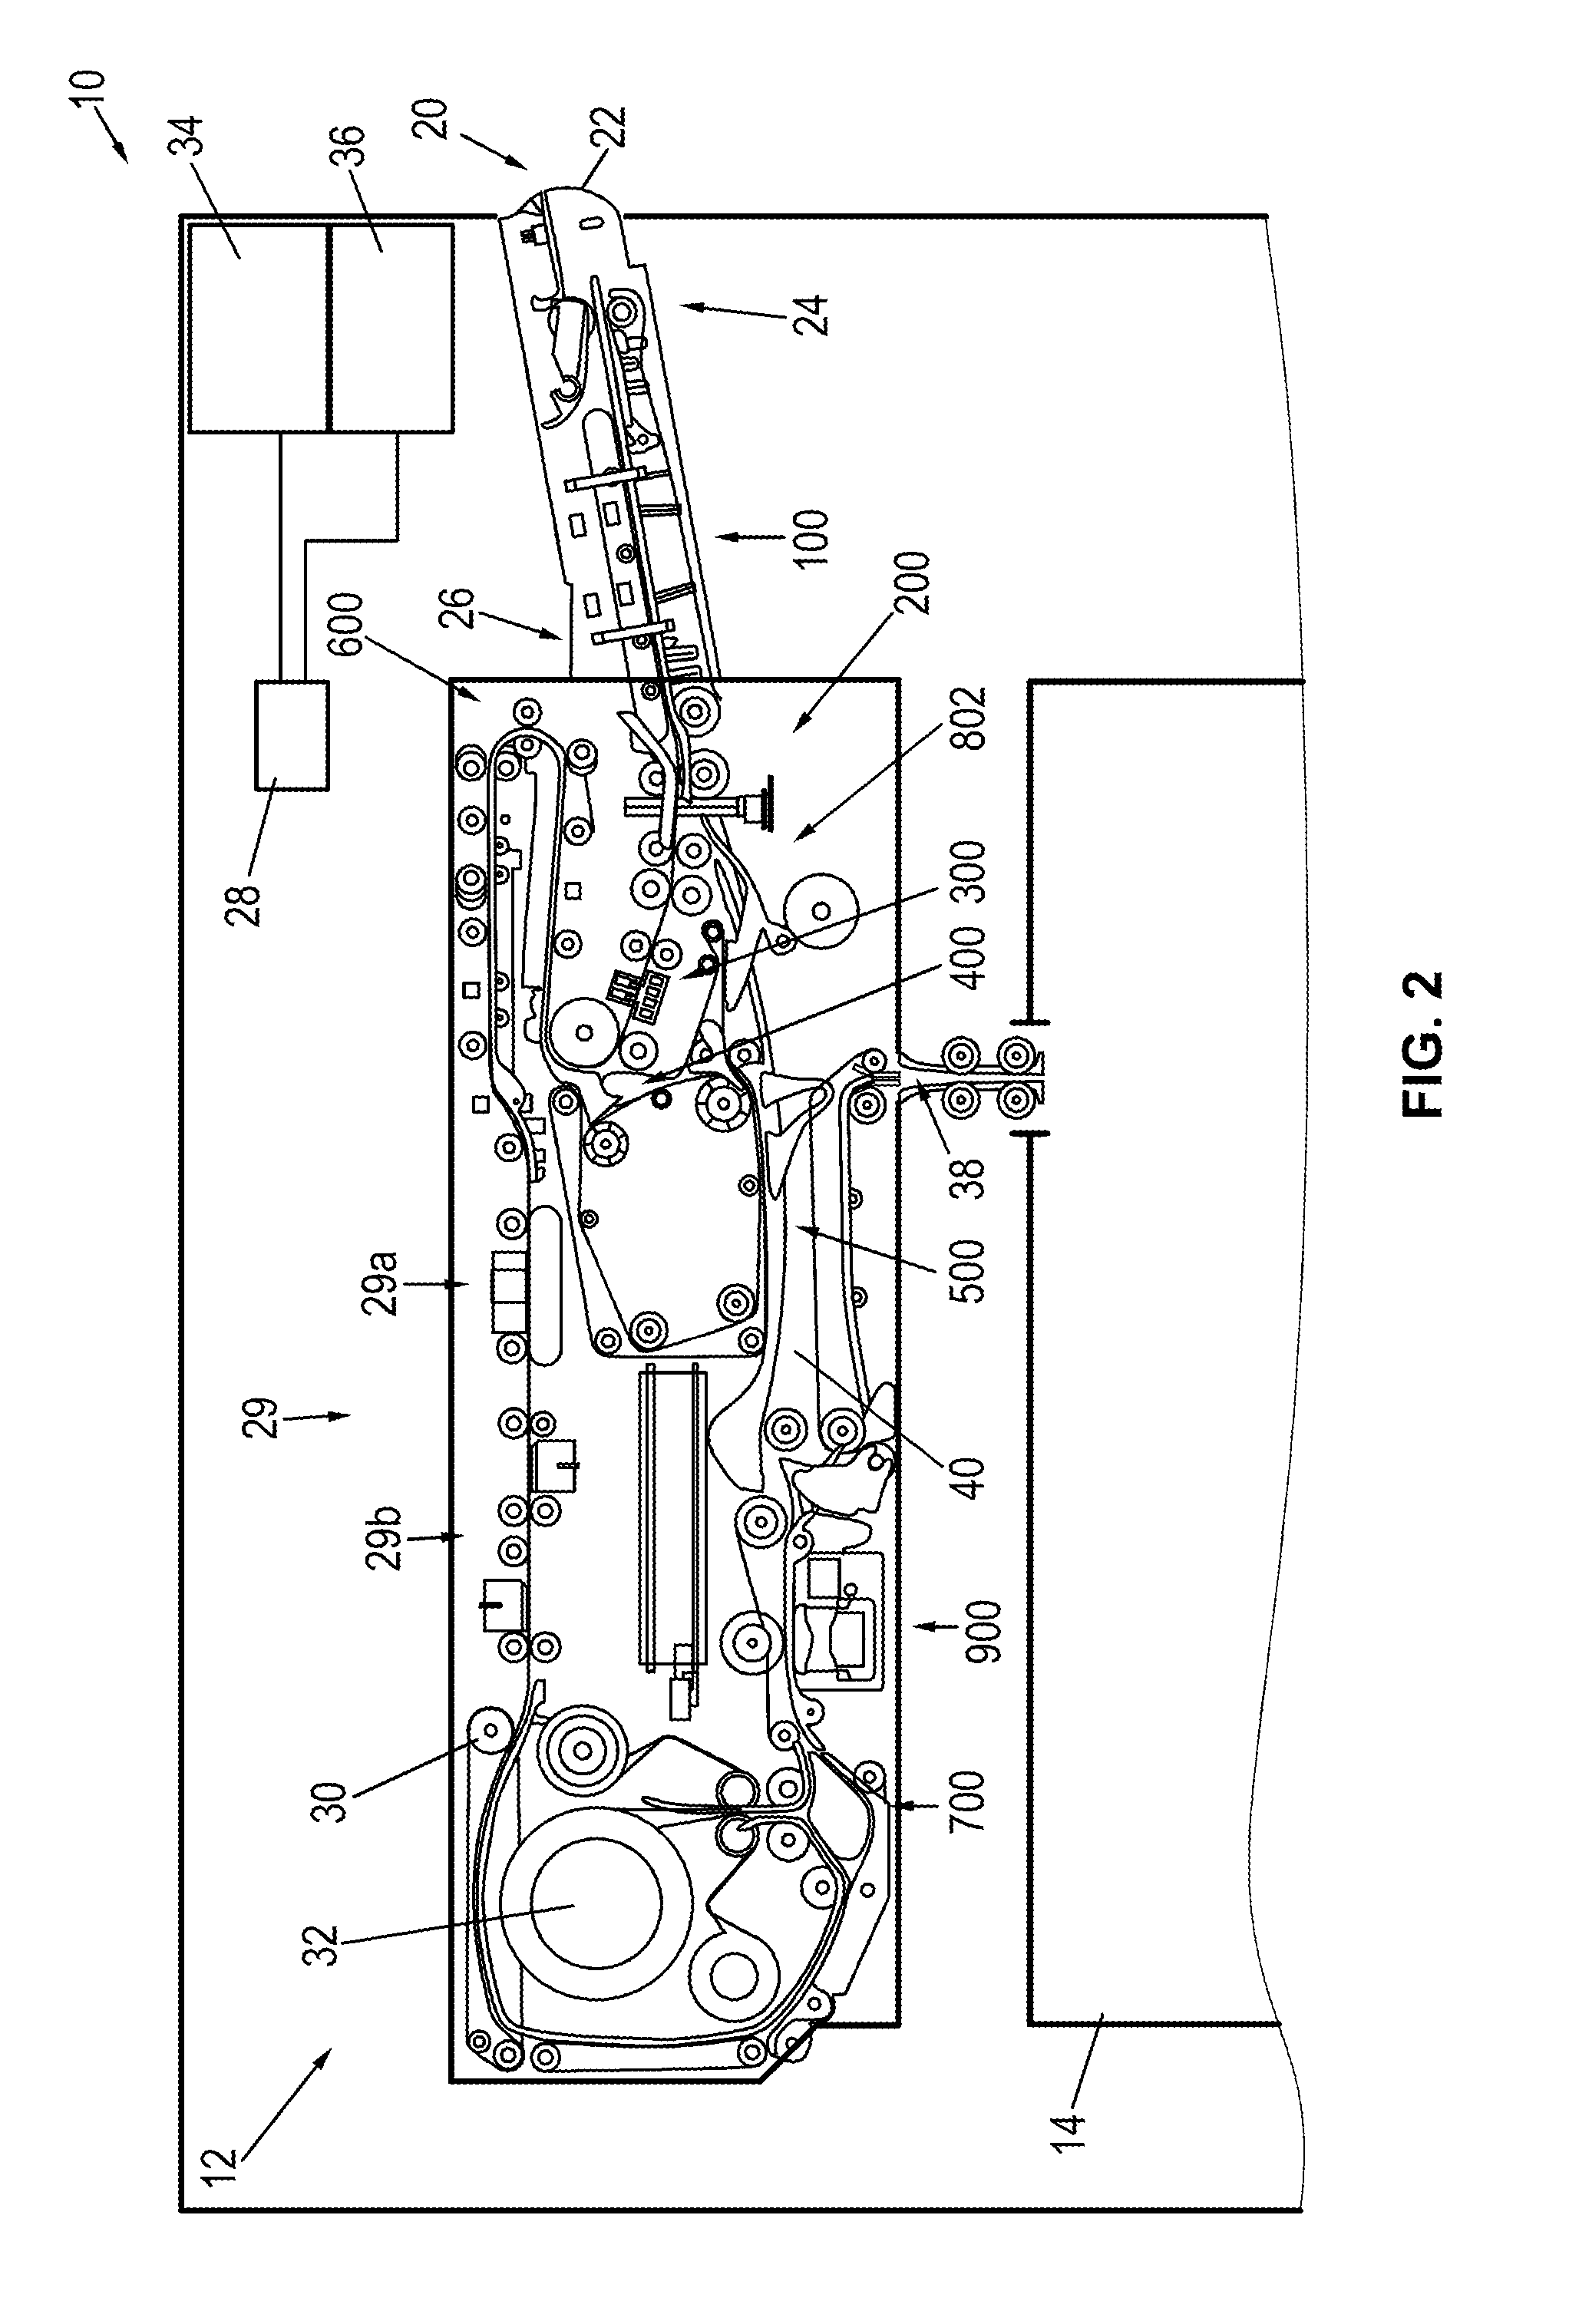 Device for handling valuable documents having an aligning unit for aligning banknotes and checks